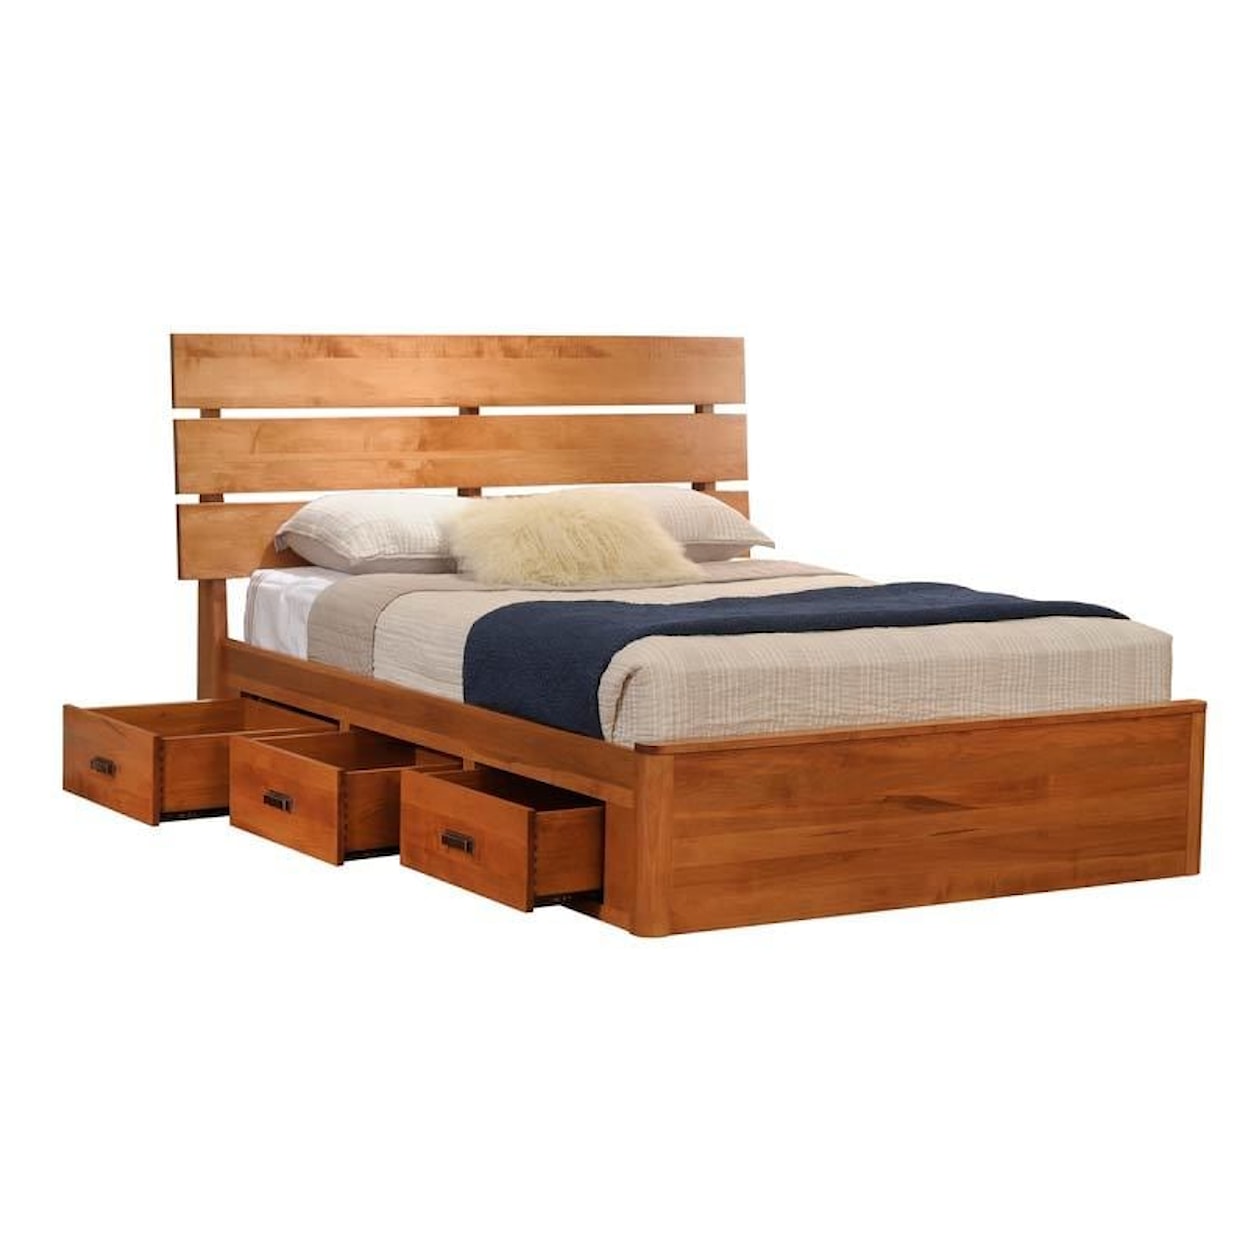 Millcraft Galaxy California King Slat Bed with 2-Drawer Units